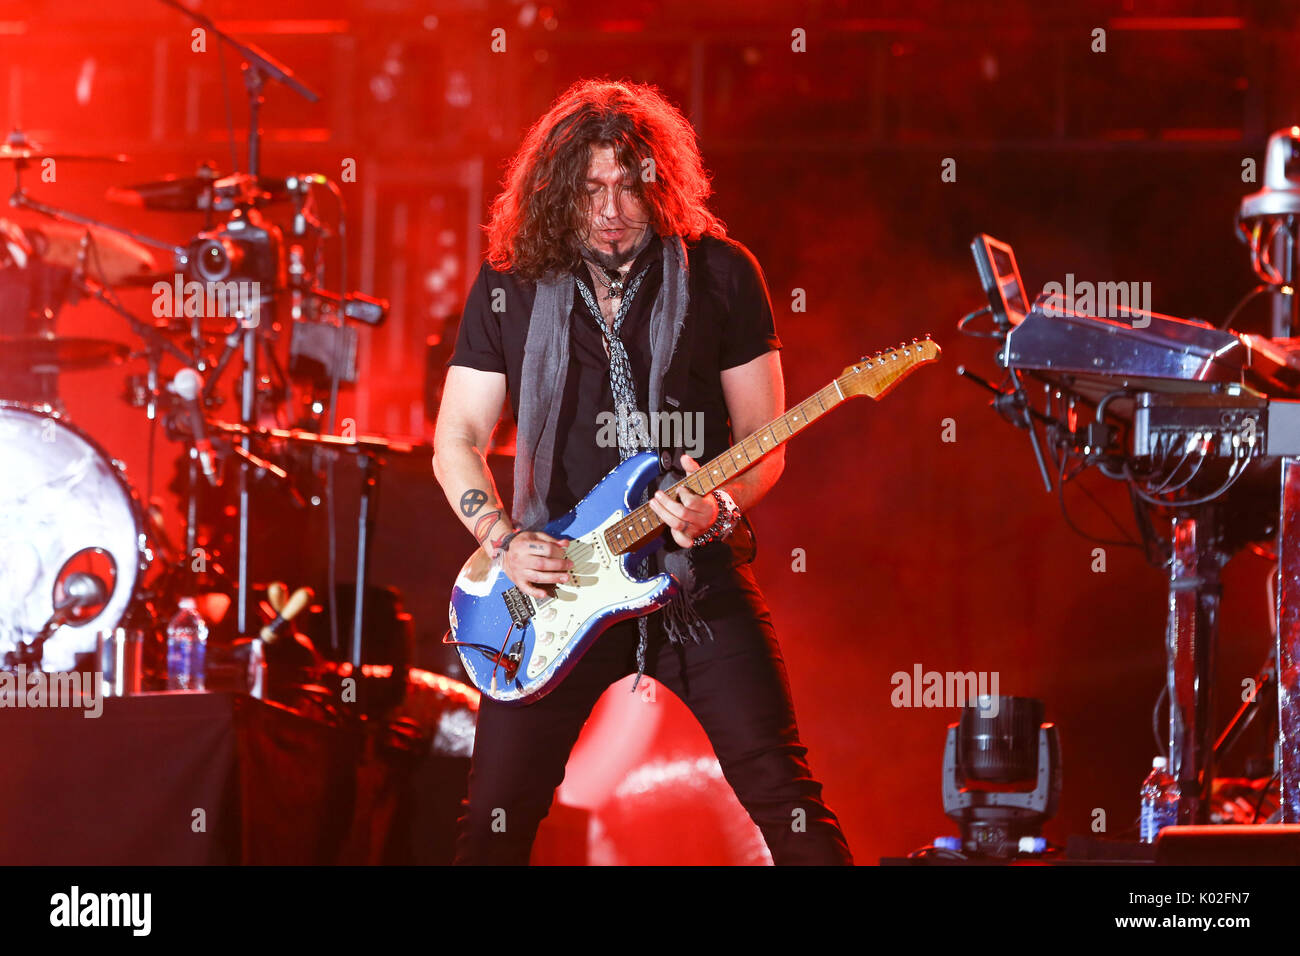 ENDICOTT, NY-Aug 18: Phil X performs in concert at En-Joie Golf Course on August 18, 2017 in Endicott, New York. Stock Photo